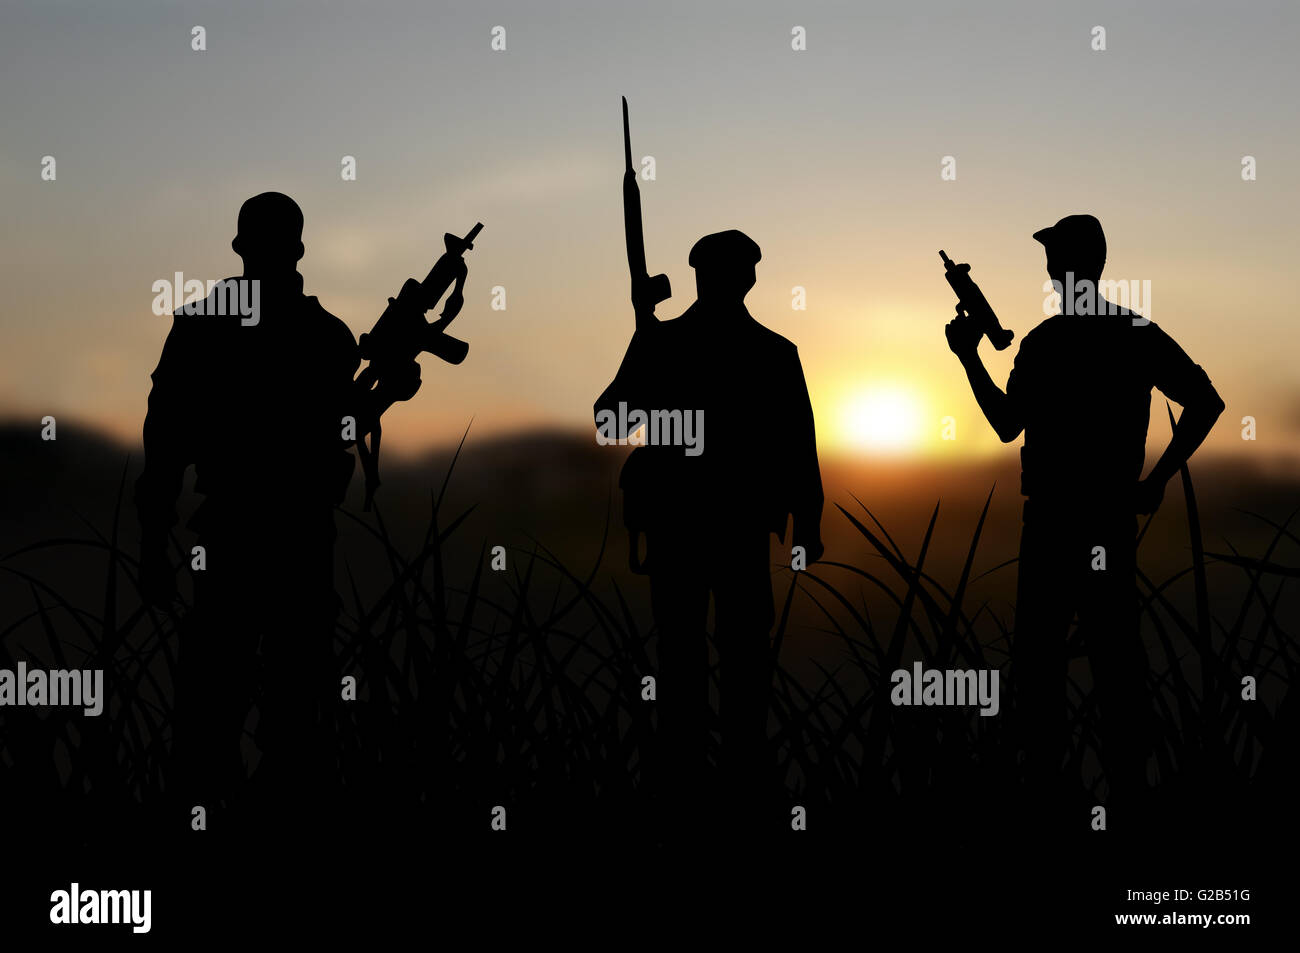 Terrorist or terrorism concept with silhouettes on sunset background Stock Photo